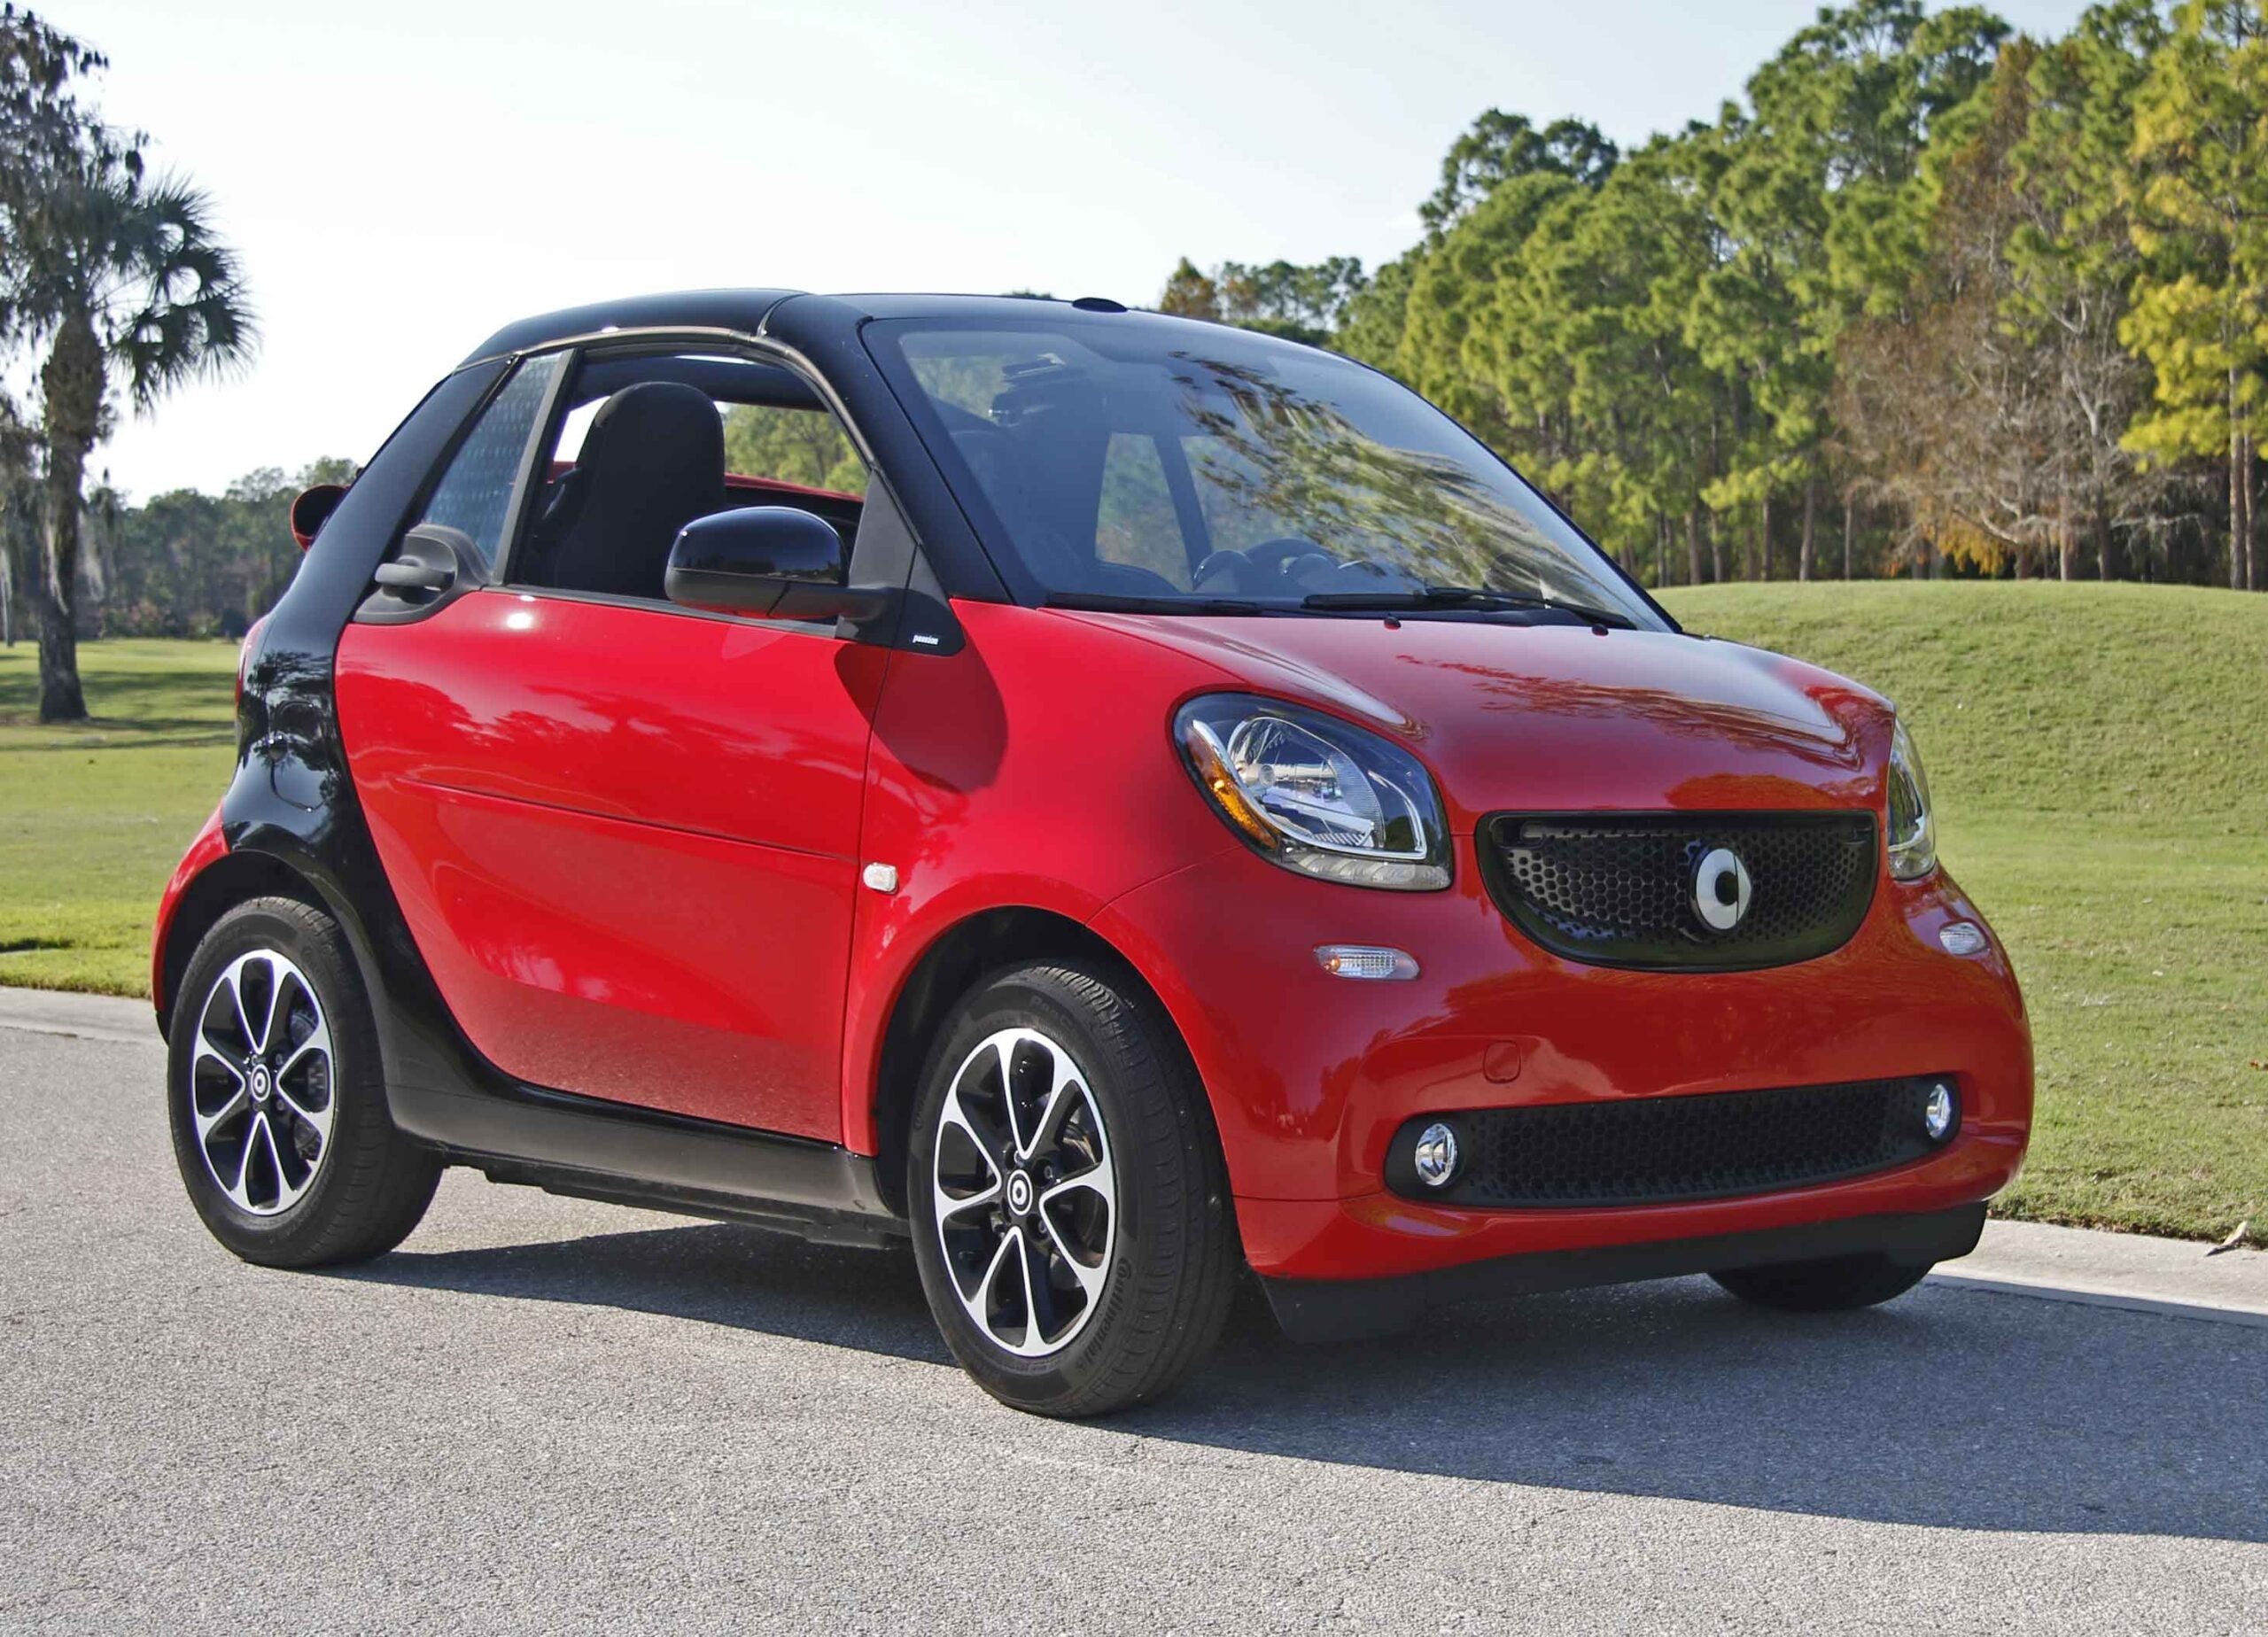 Review: Smart Fortwo adds up to something interesting